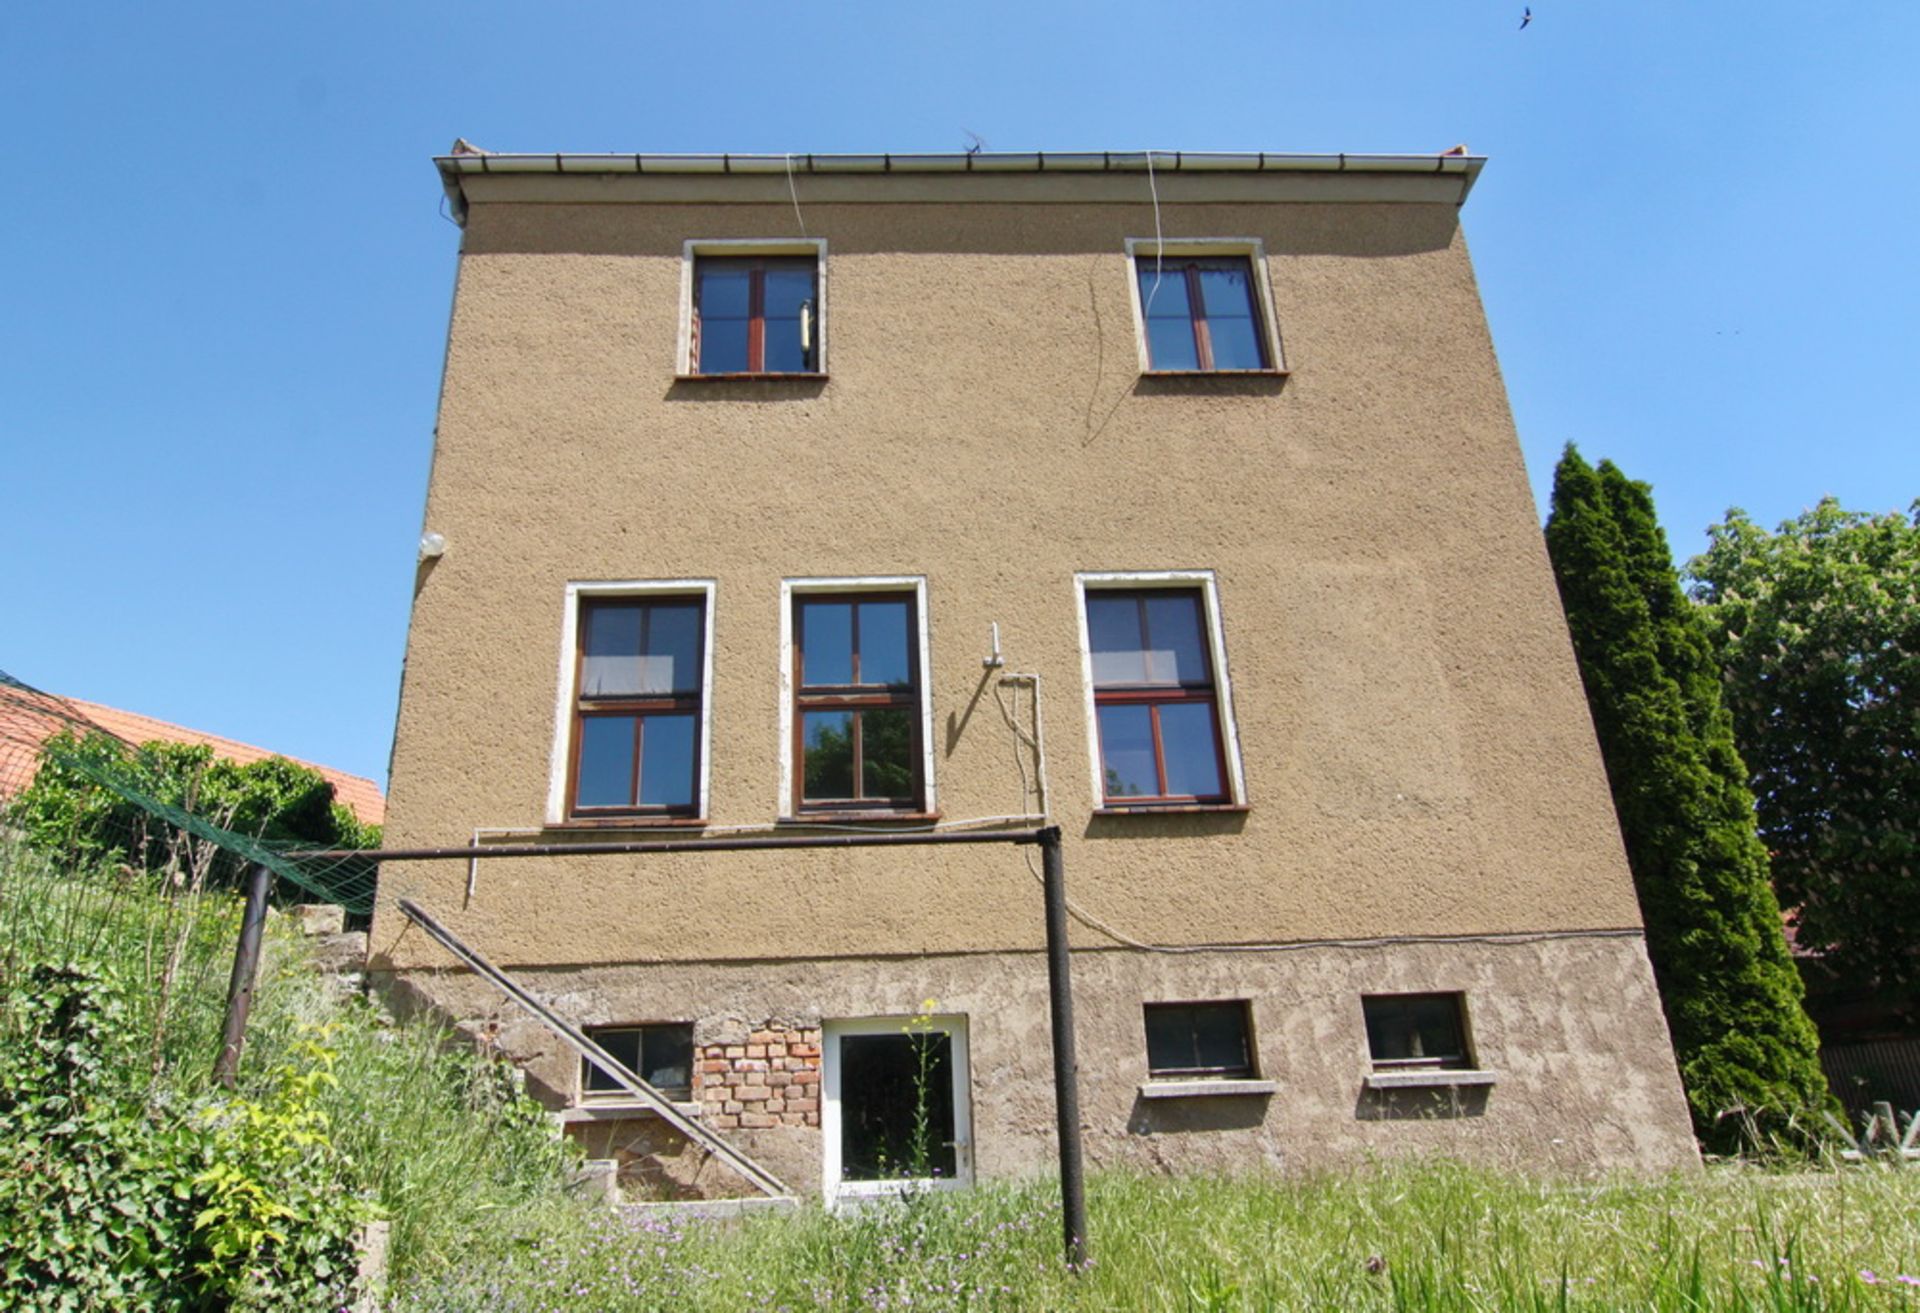 LARGE HOUSING BLOCK HORNSOMMEM, GERMANY READY TO MOVE INTO FREEHOLD VACANT POSSESSION - Image 9 of 91